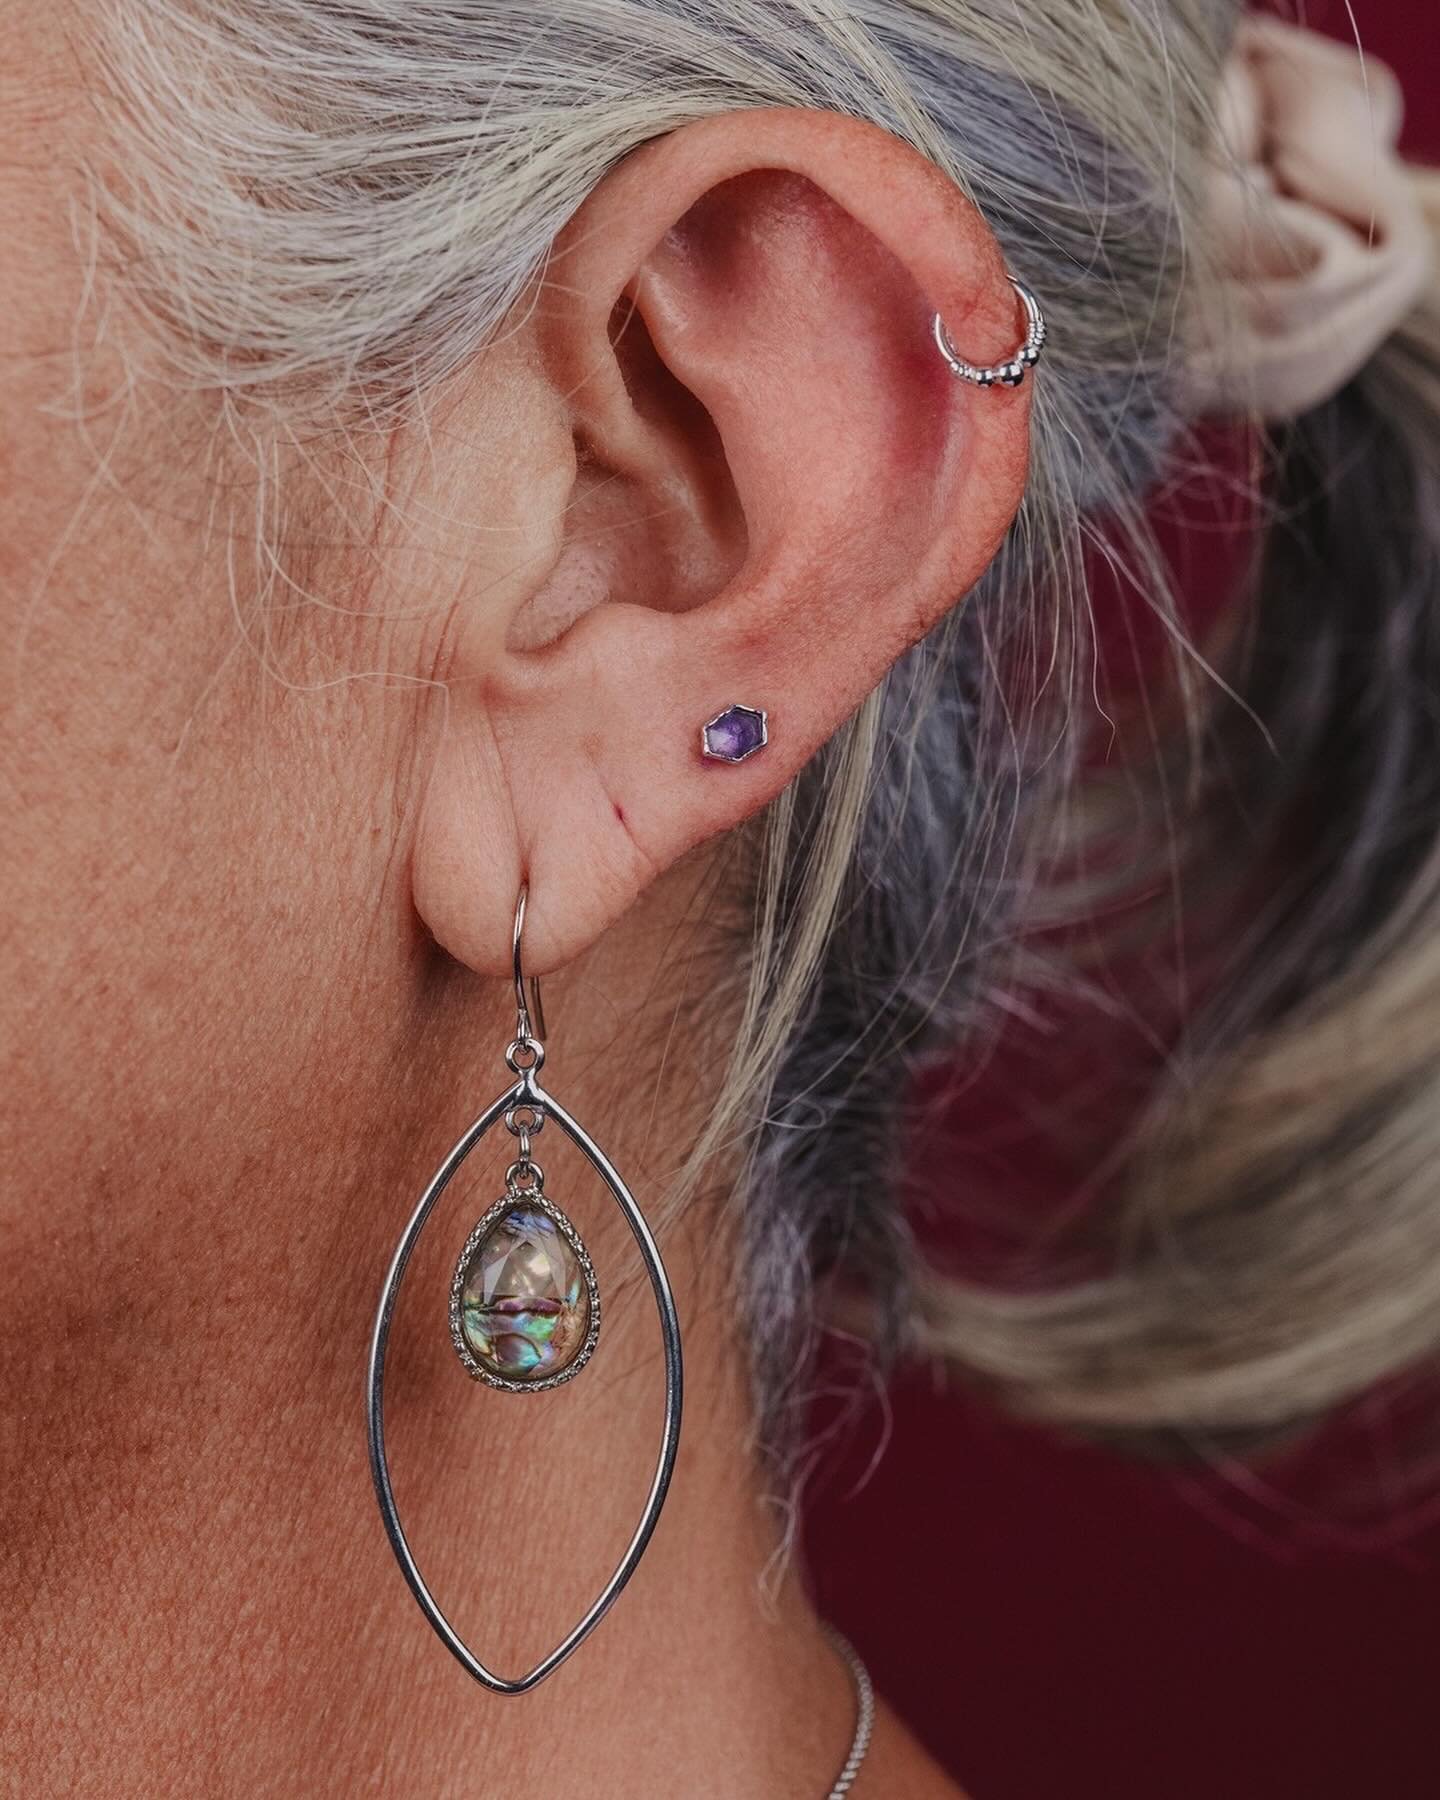 I KNOW🌊
 
YOU WELL
 
William added a bold high lobe piercing for Nina, with a big chunk of amethyst from Buddha Jewelry, as well as installing a white gold &ldquo;Myla&rdquo; ring from BVLA, and the silver tones with colorful stones all look so nice